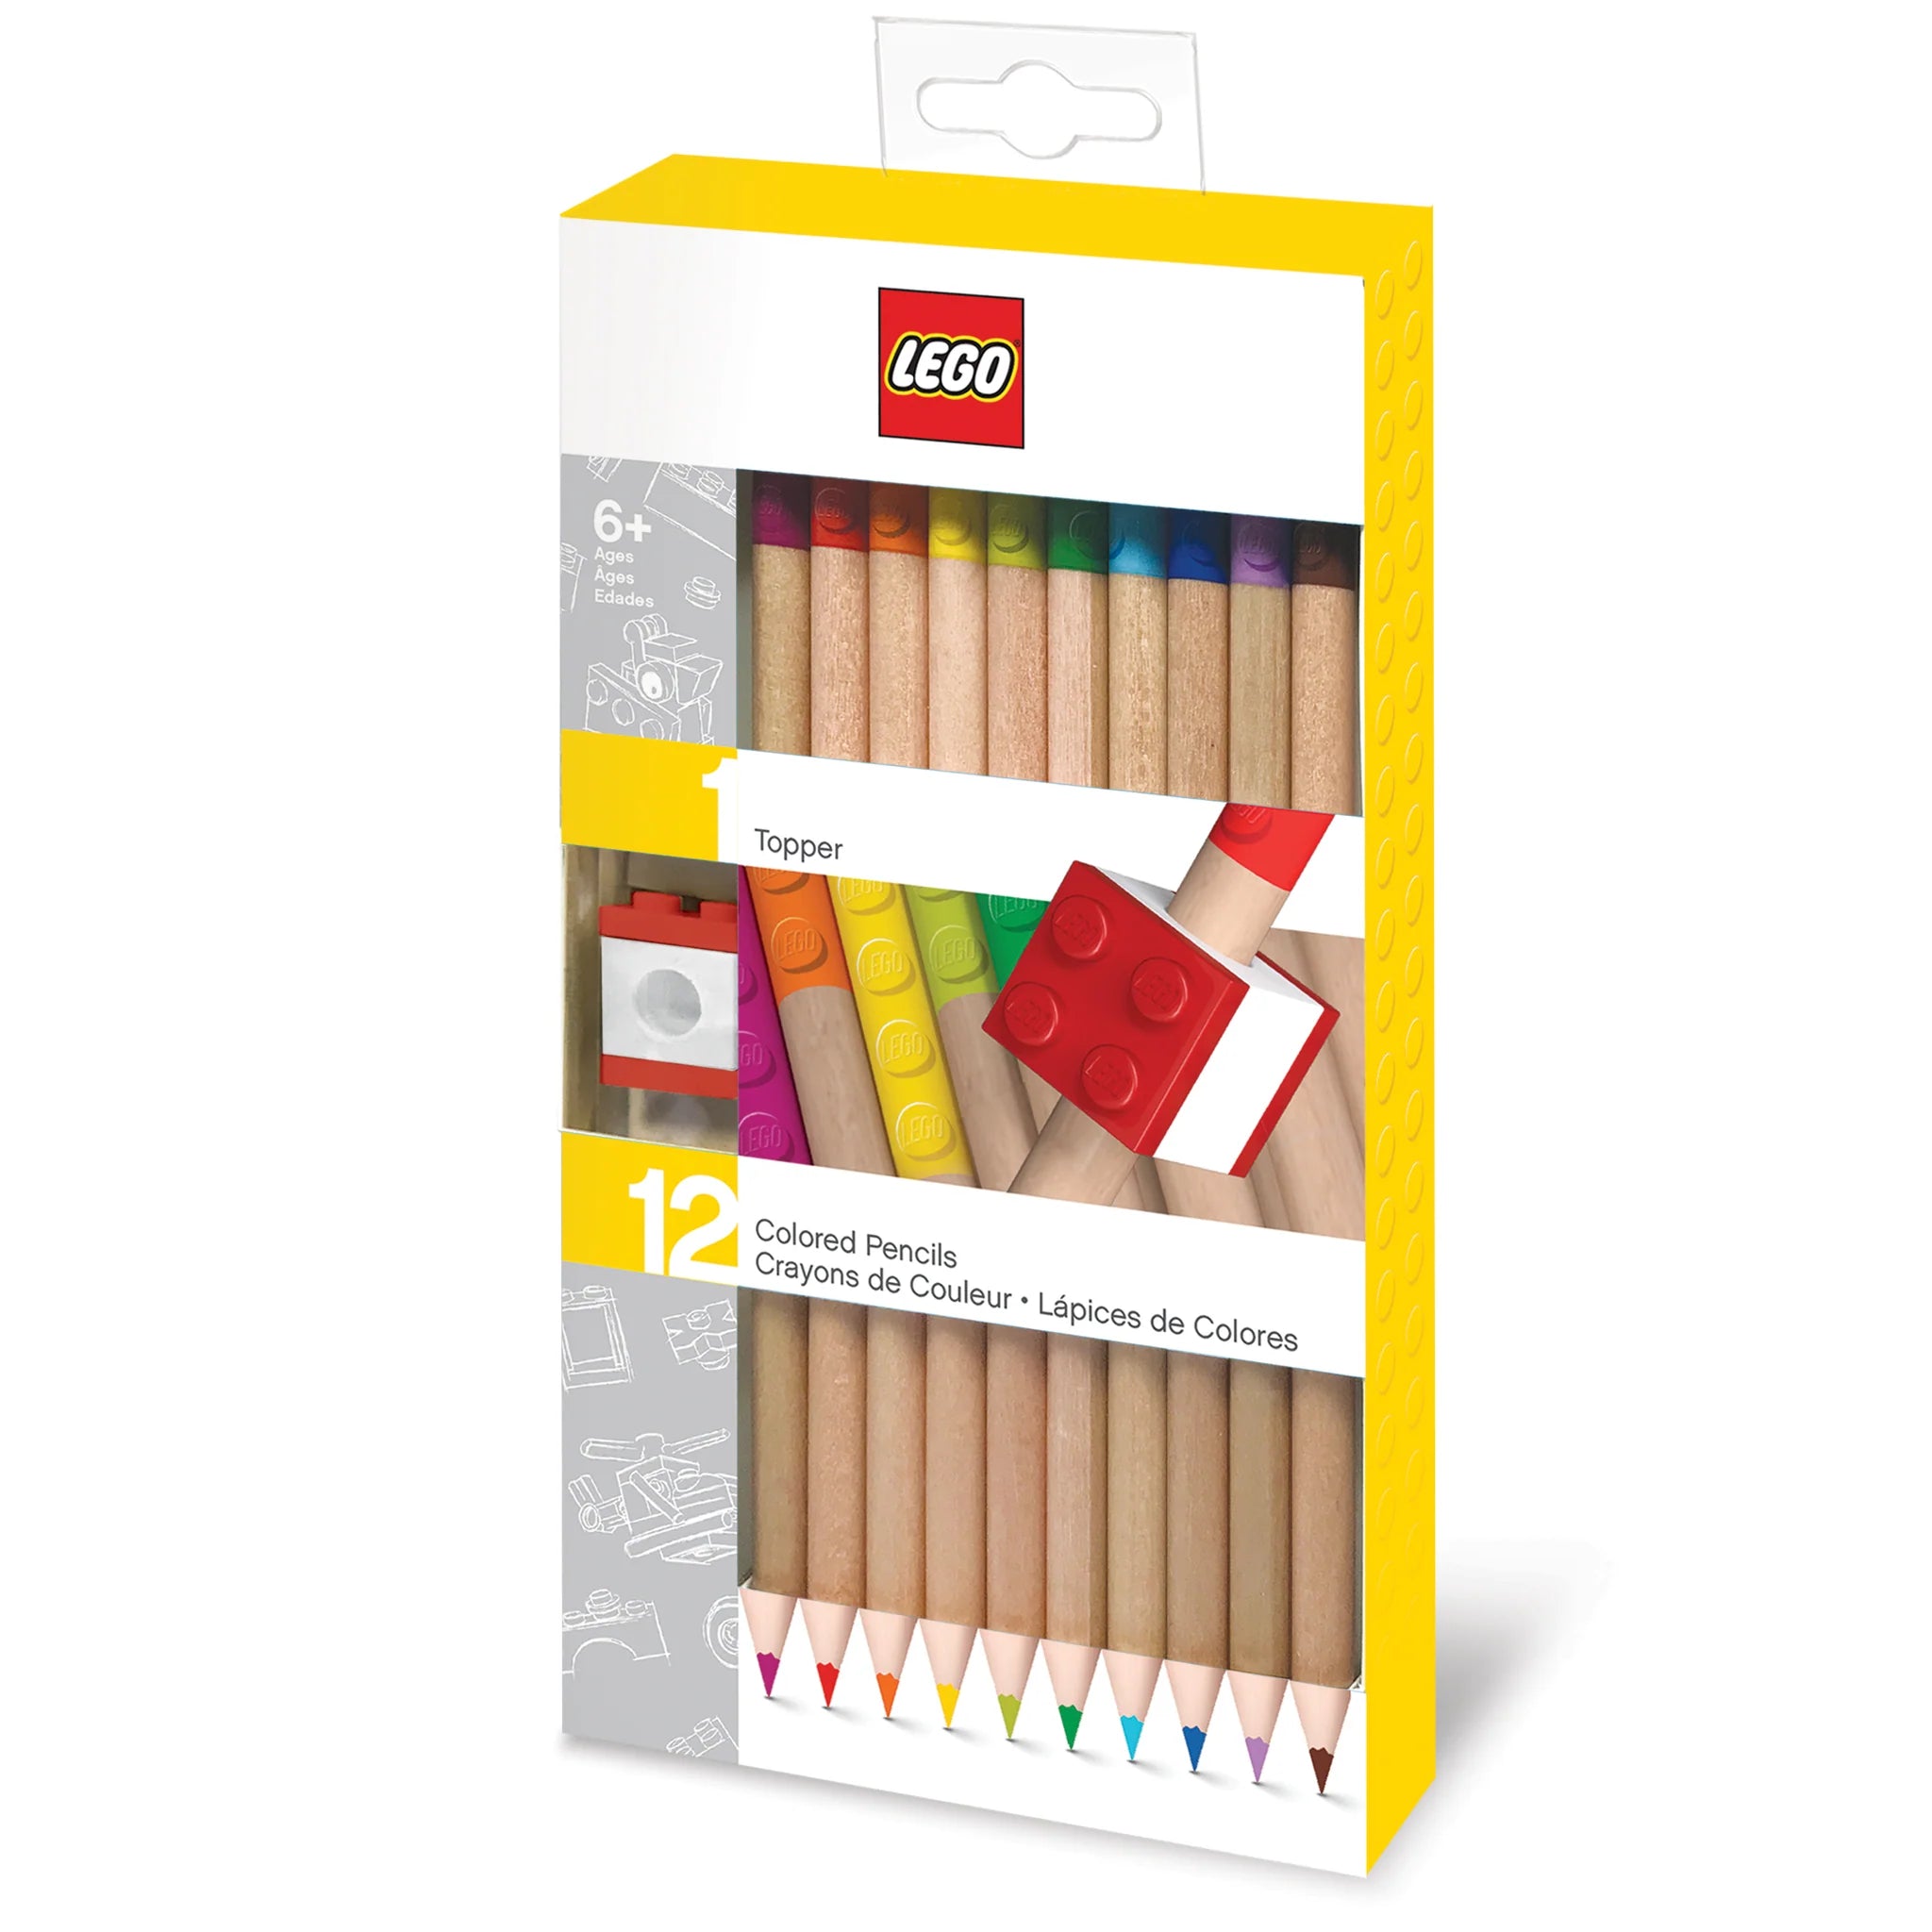 LEGO Iconic 12-Pack Colored Pencils with Topper